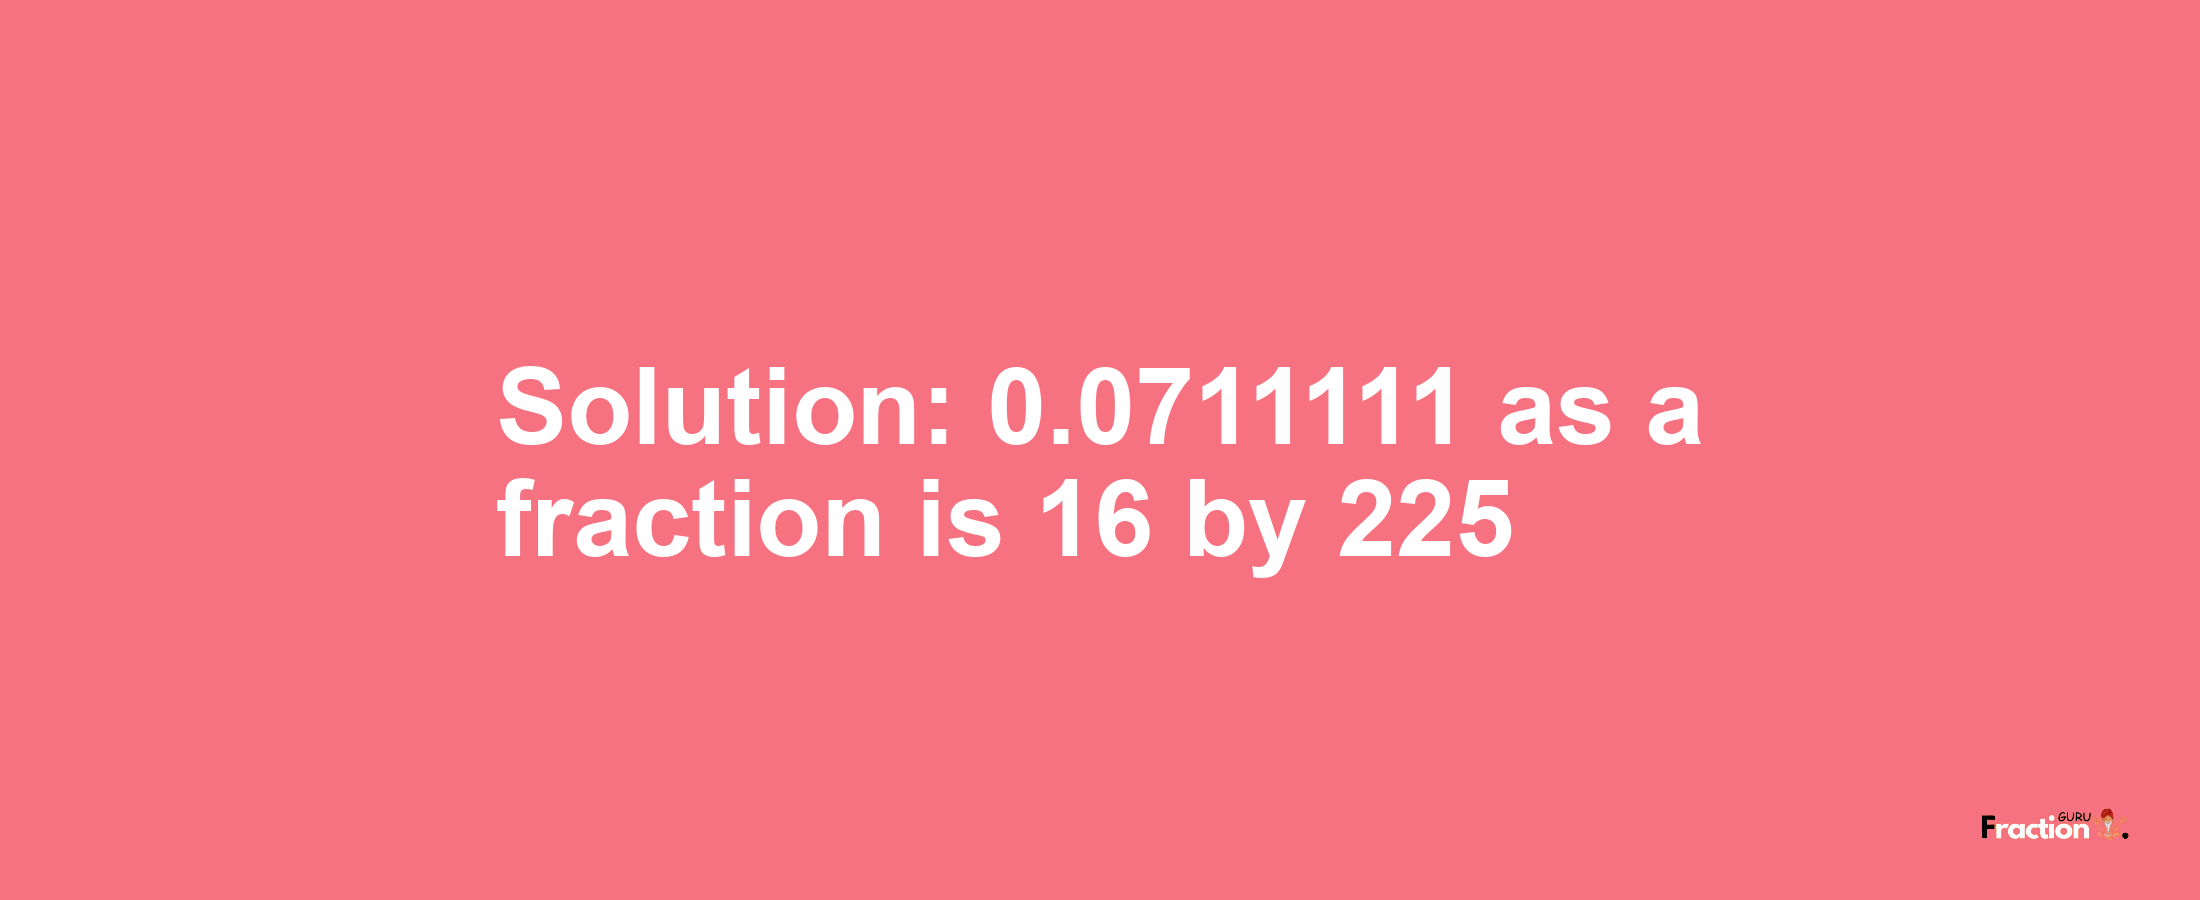 Solution:0.0711111 as a fraction is 16/225